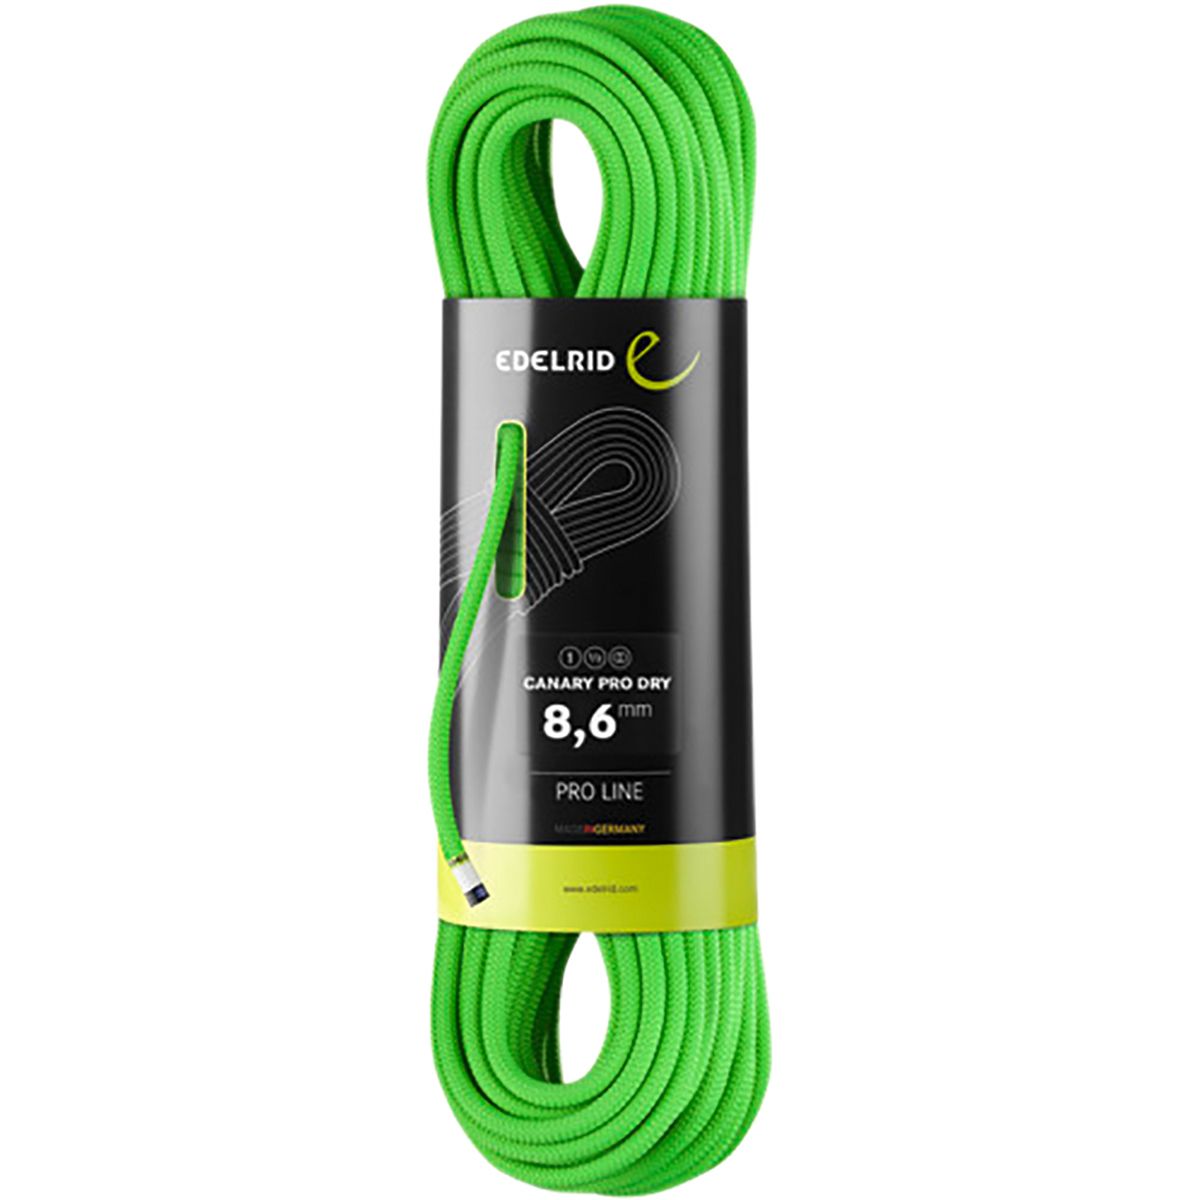 Edelrid Canary Pro Dry Climbing Rope - 8.6mm